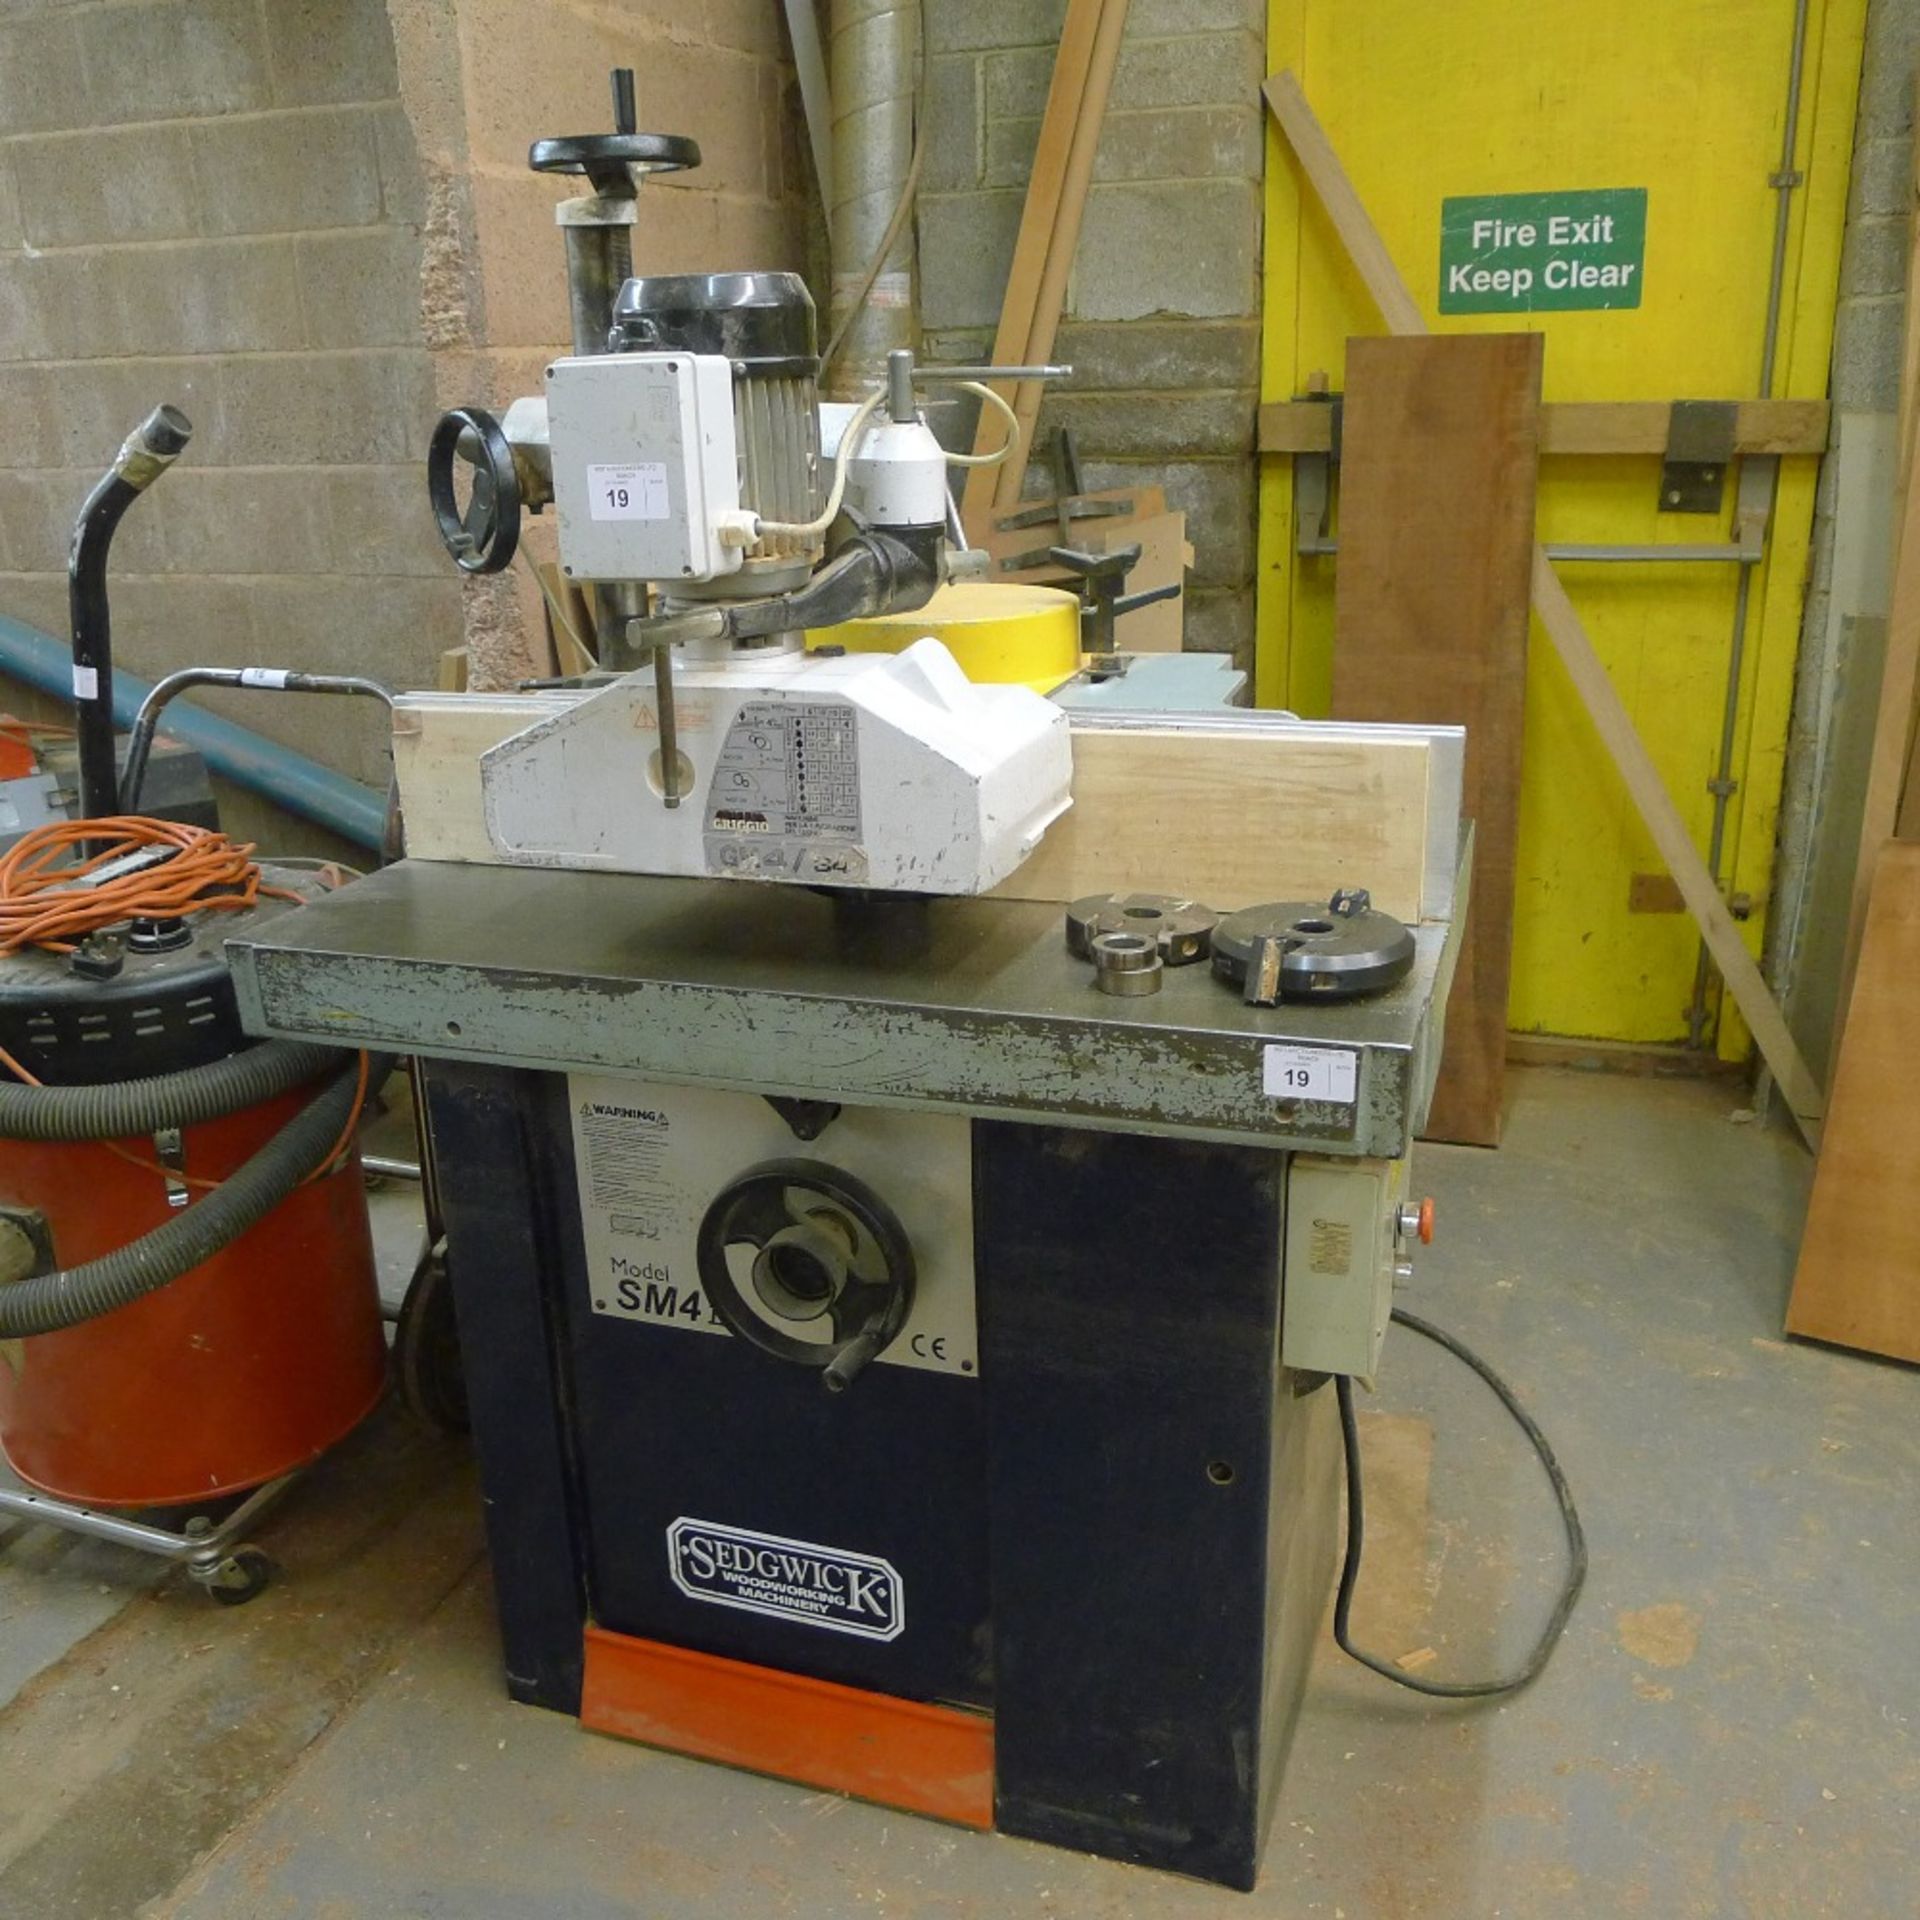 1 spindle moulder by Sedgwick type SM4 II, 3ph with 1 cutter block (fitted), 2 other cutter blocks